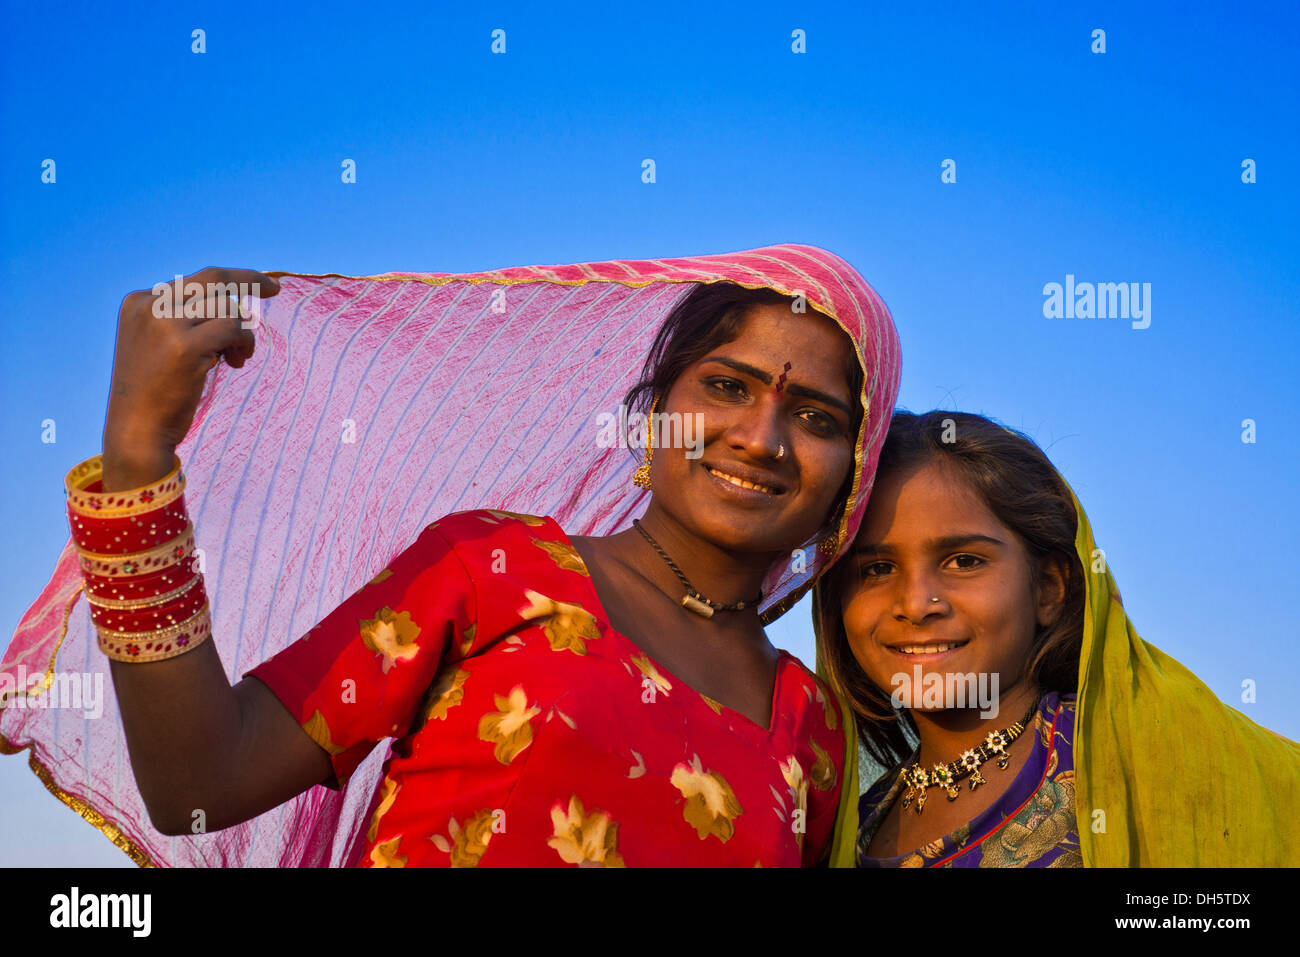 Two friendly Indian girls with colorful head scarves and jewellery, portrait, Pushkar, Rajasthan, India Stock Photo